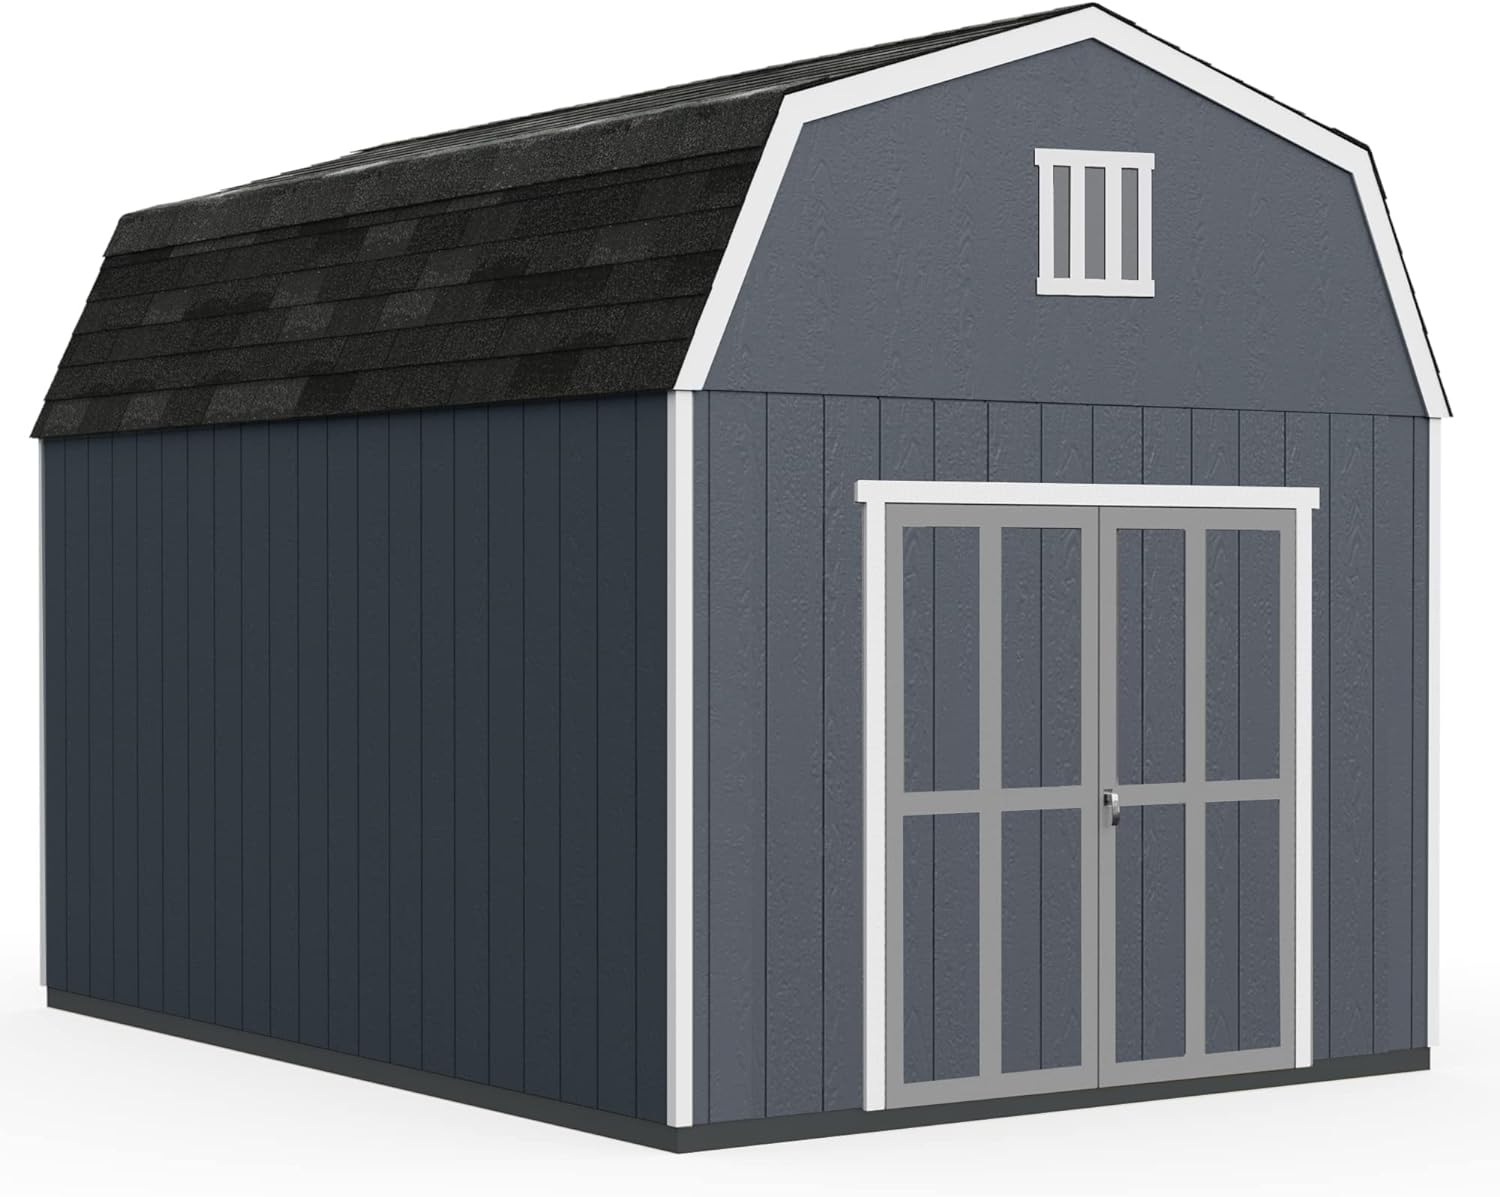 Handy Home Products Braymore 10x14 Do-It-Yourself Wooden Storage Shed
1